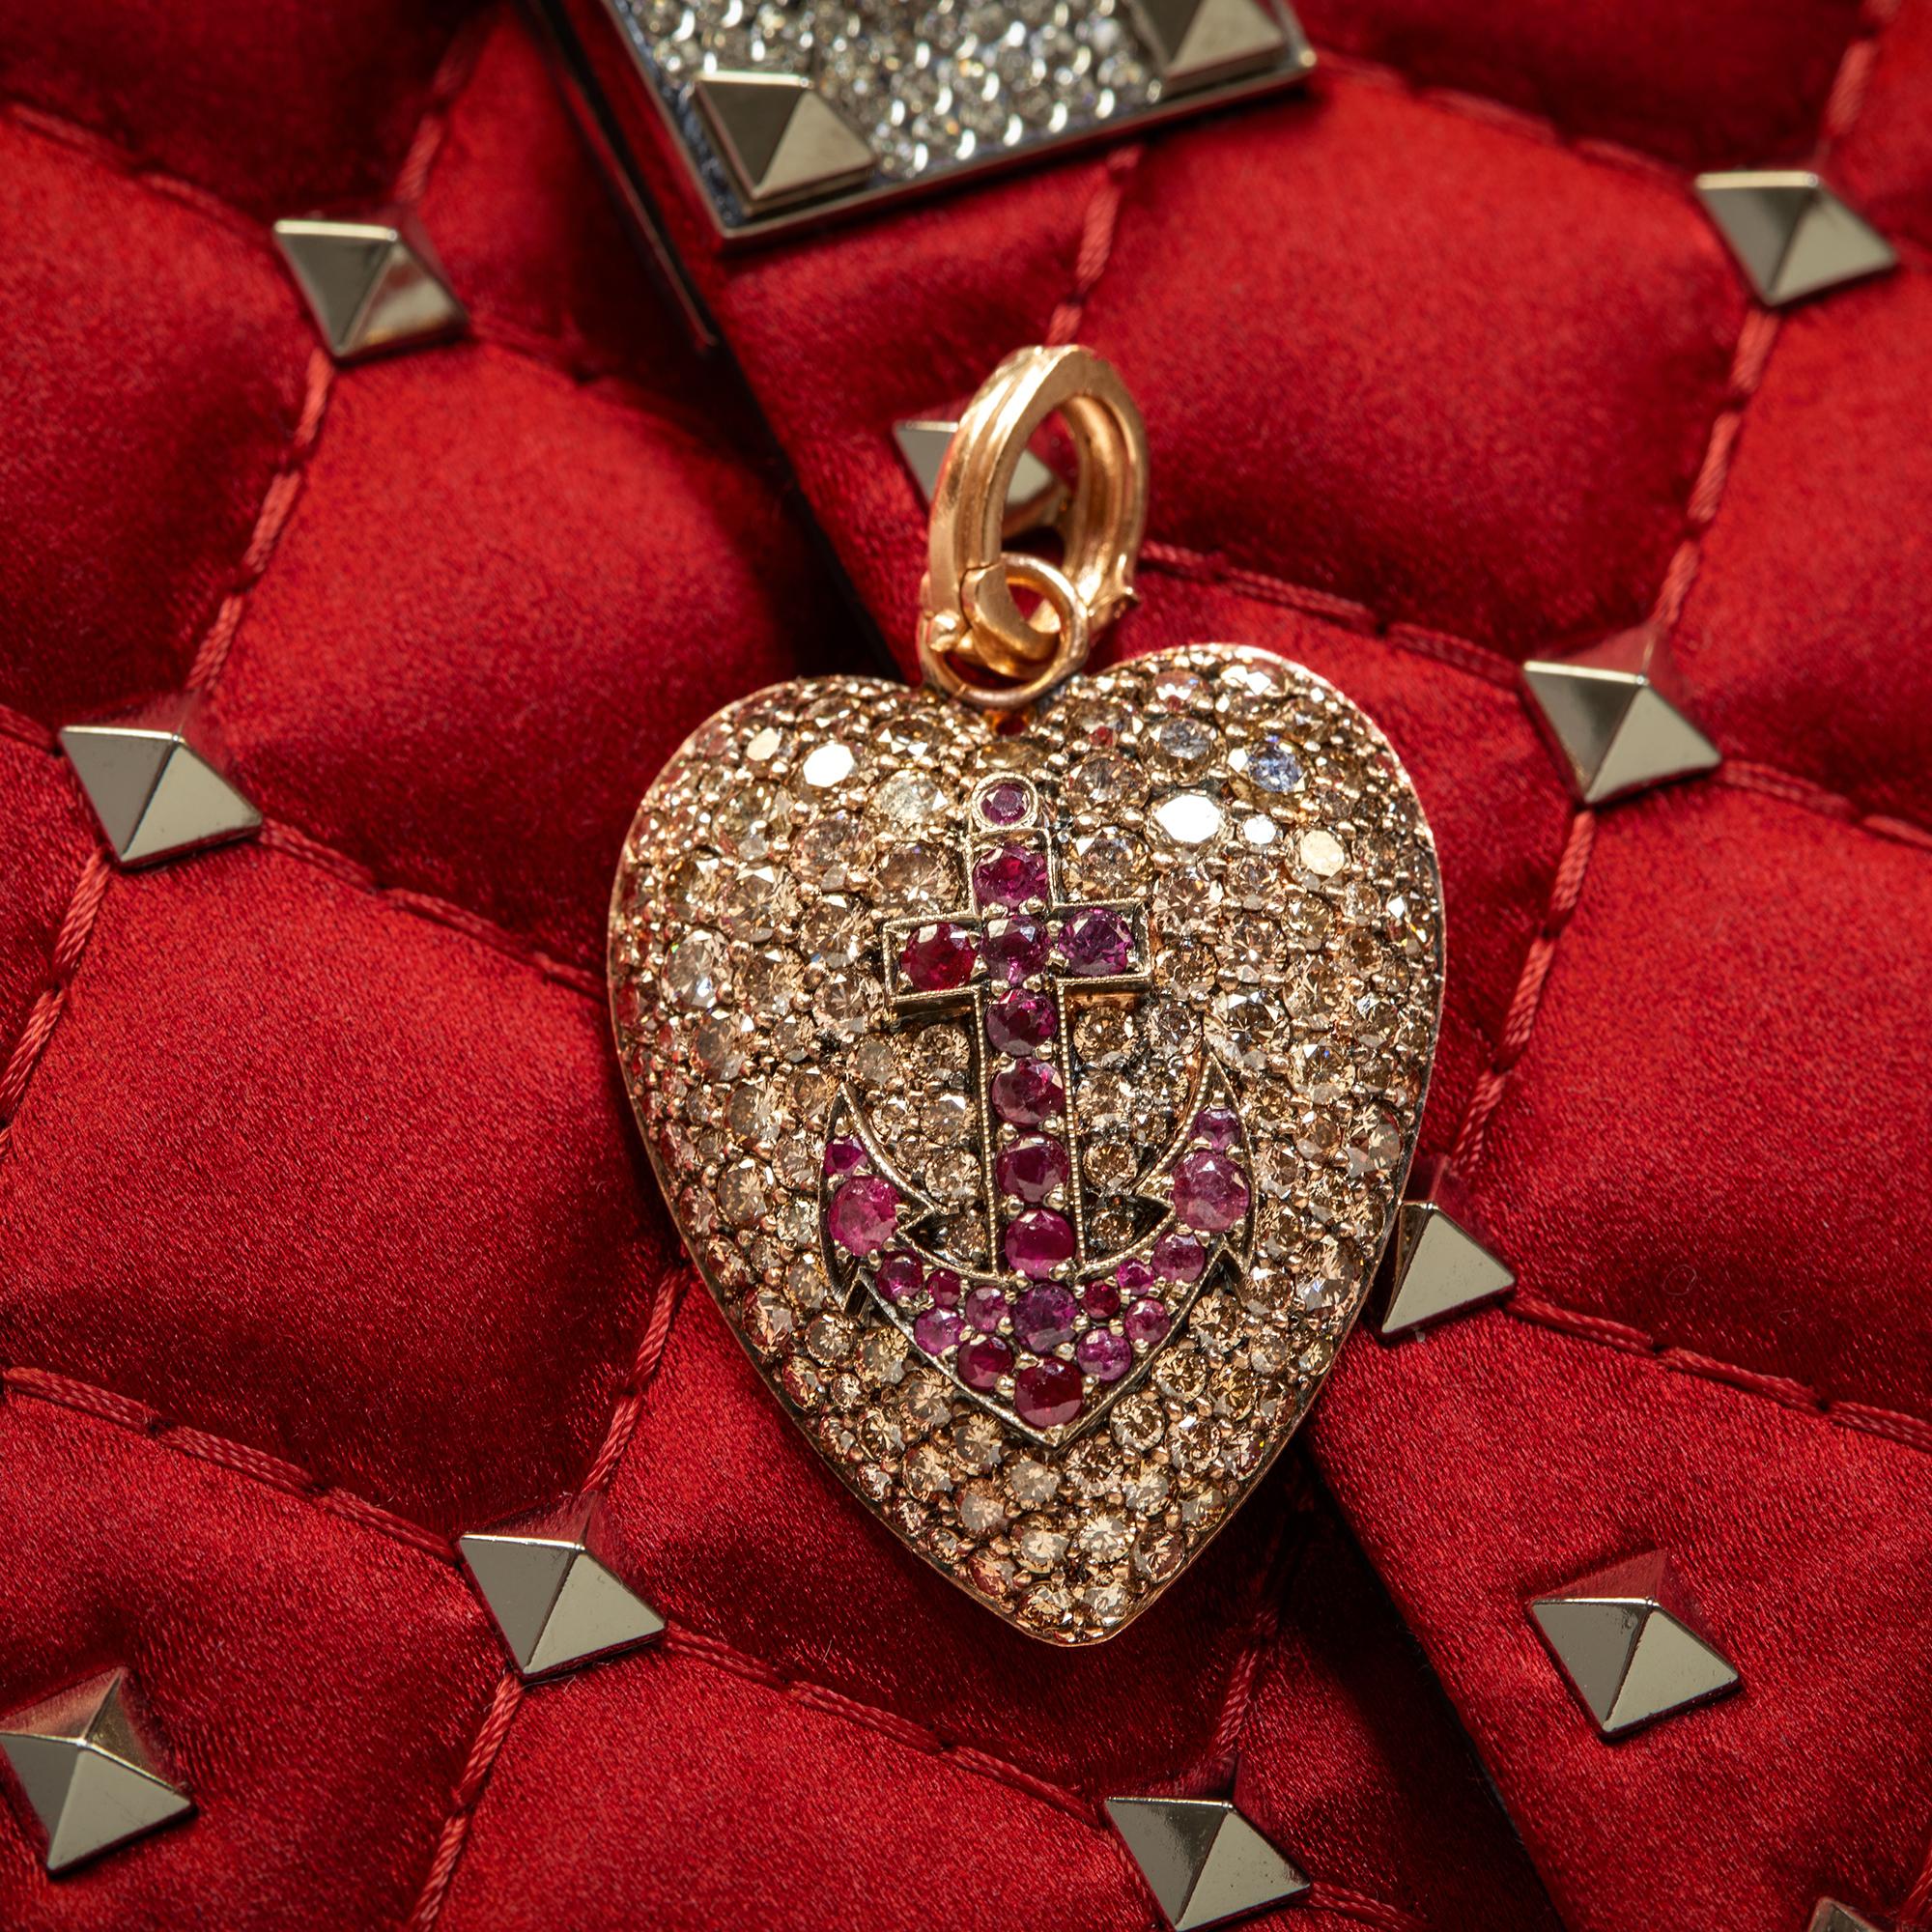 A symbol of steadfastness and love, this heart-shaped anchor pendant is encrusted with champagne diamonds and lively red rubies.

18K rose gold
1.24 carats of rubies
5.88 carats of champagne diamonds
Anchor is 1.6 inches long
Anchor is 1 inch wide